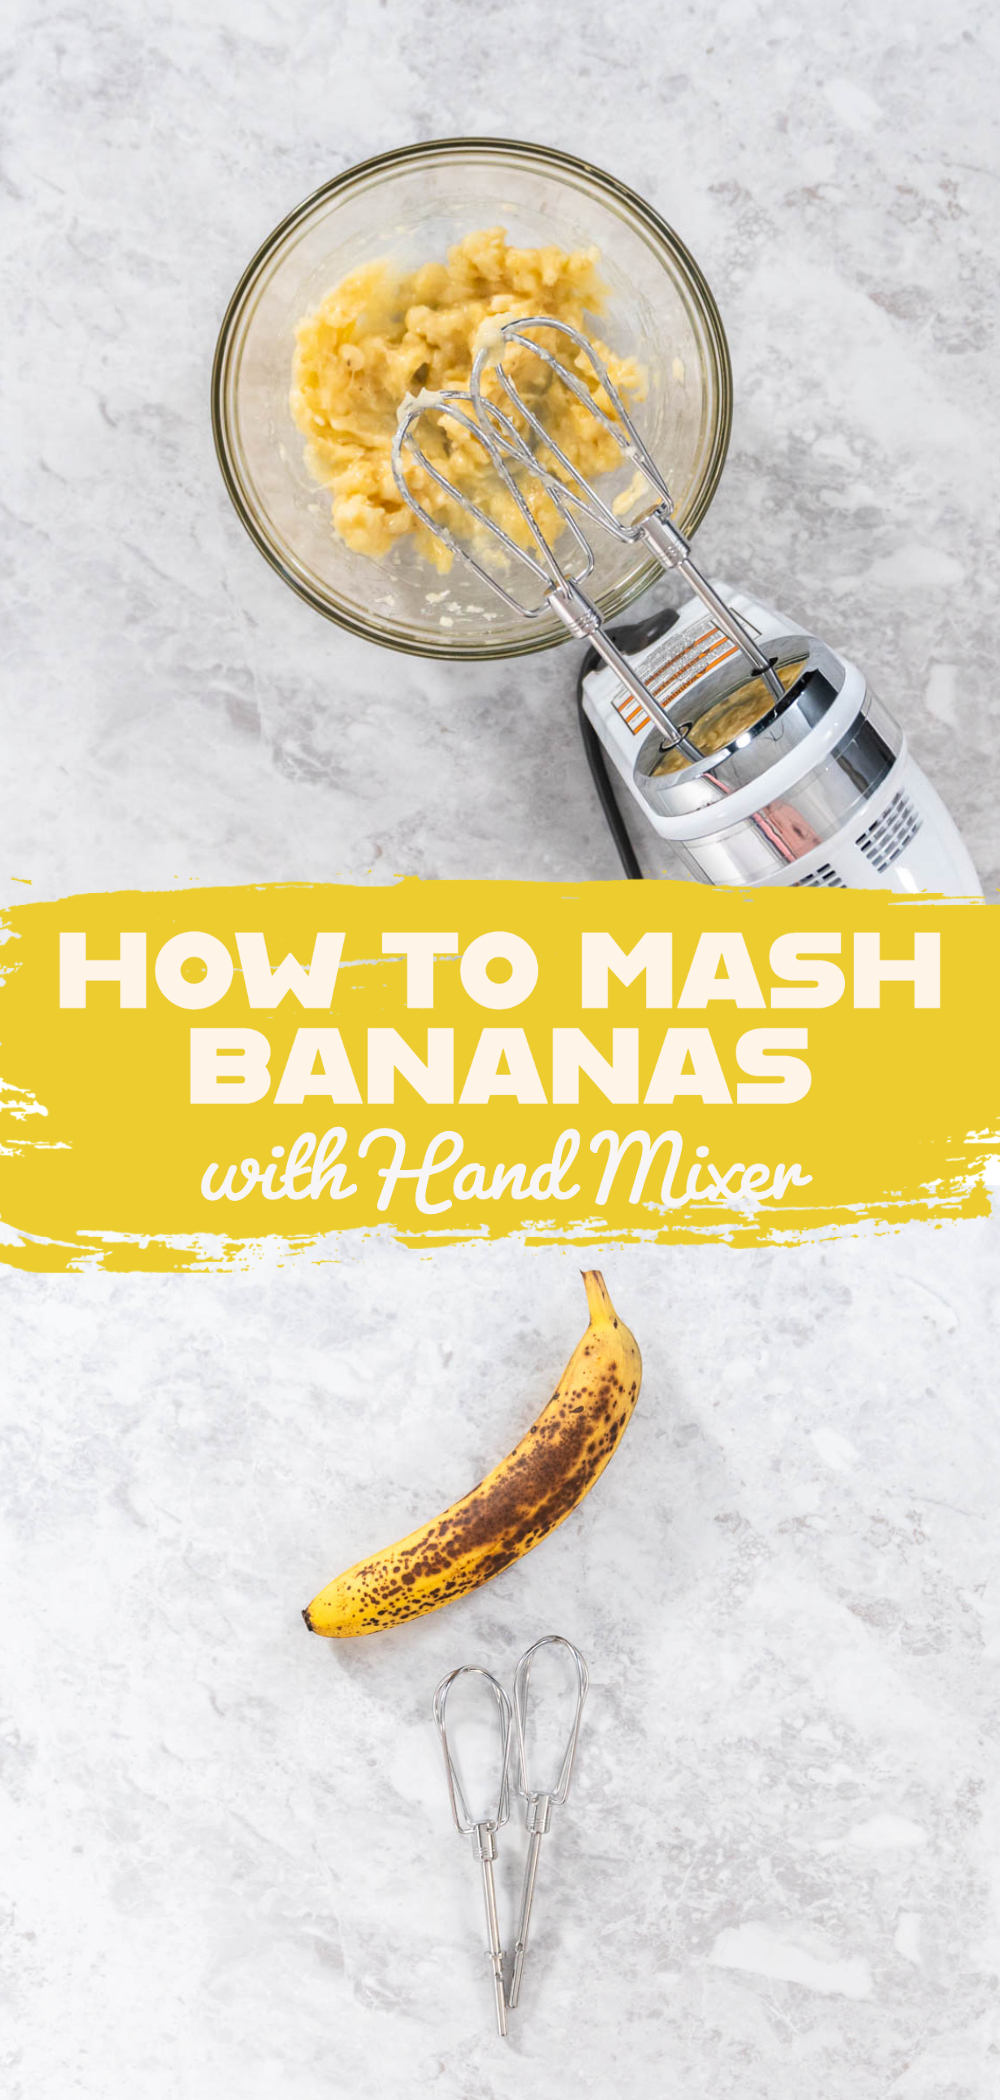 How to Mash Bananas with Hand Mixer